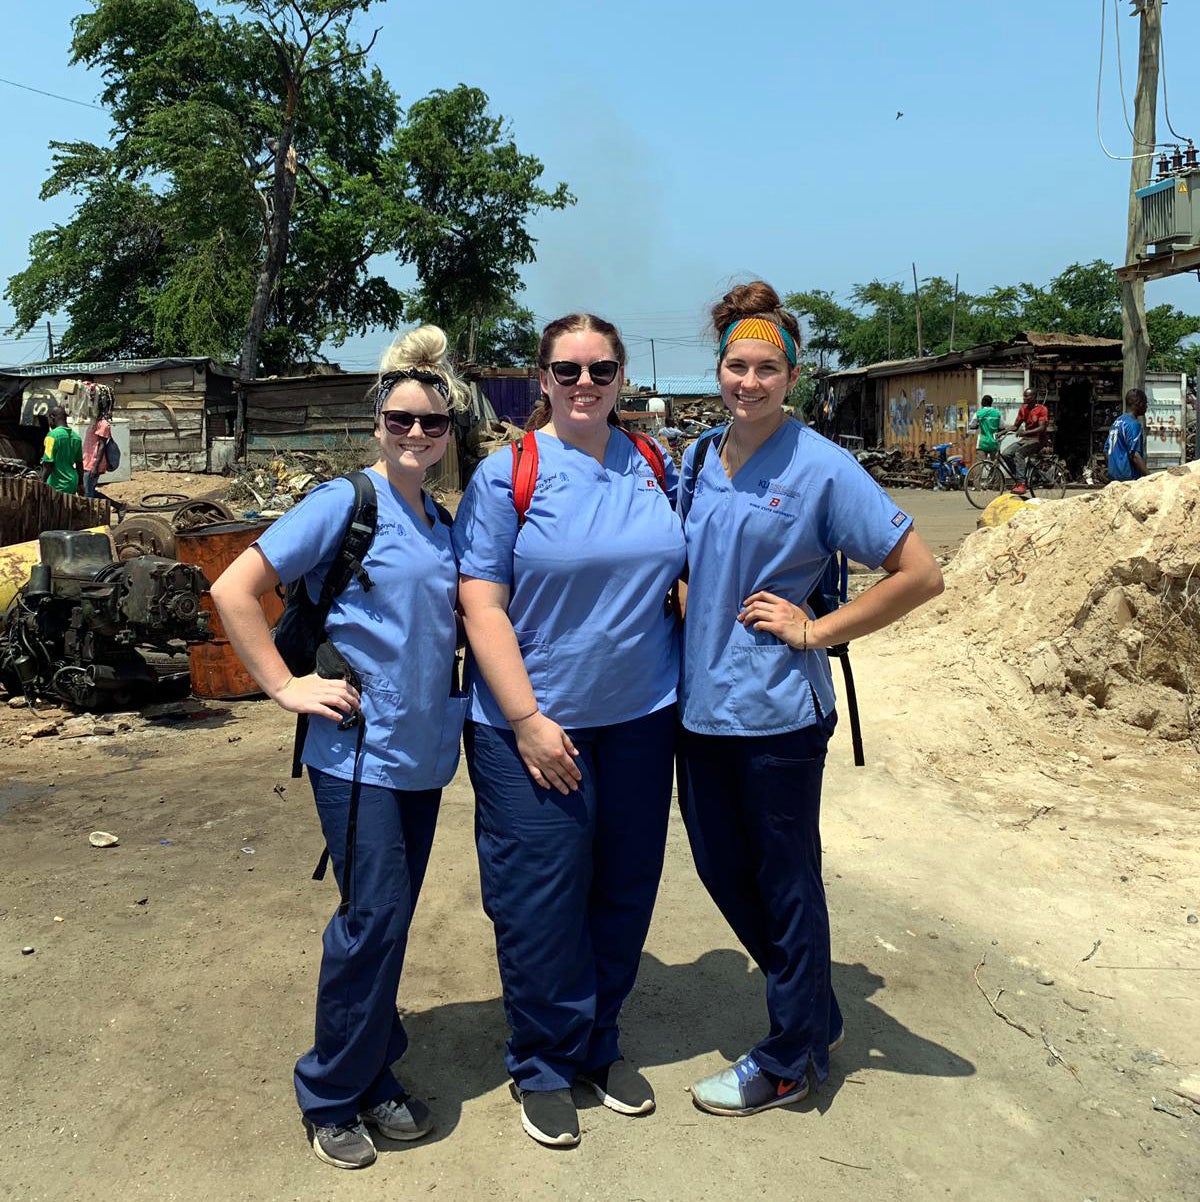 Abbey, Megan, and Davis posing for a picture in Ghana